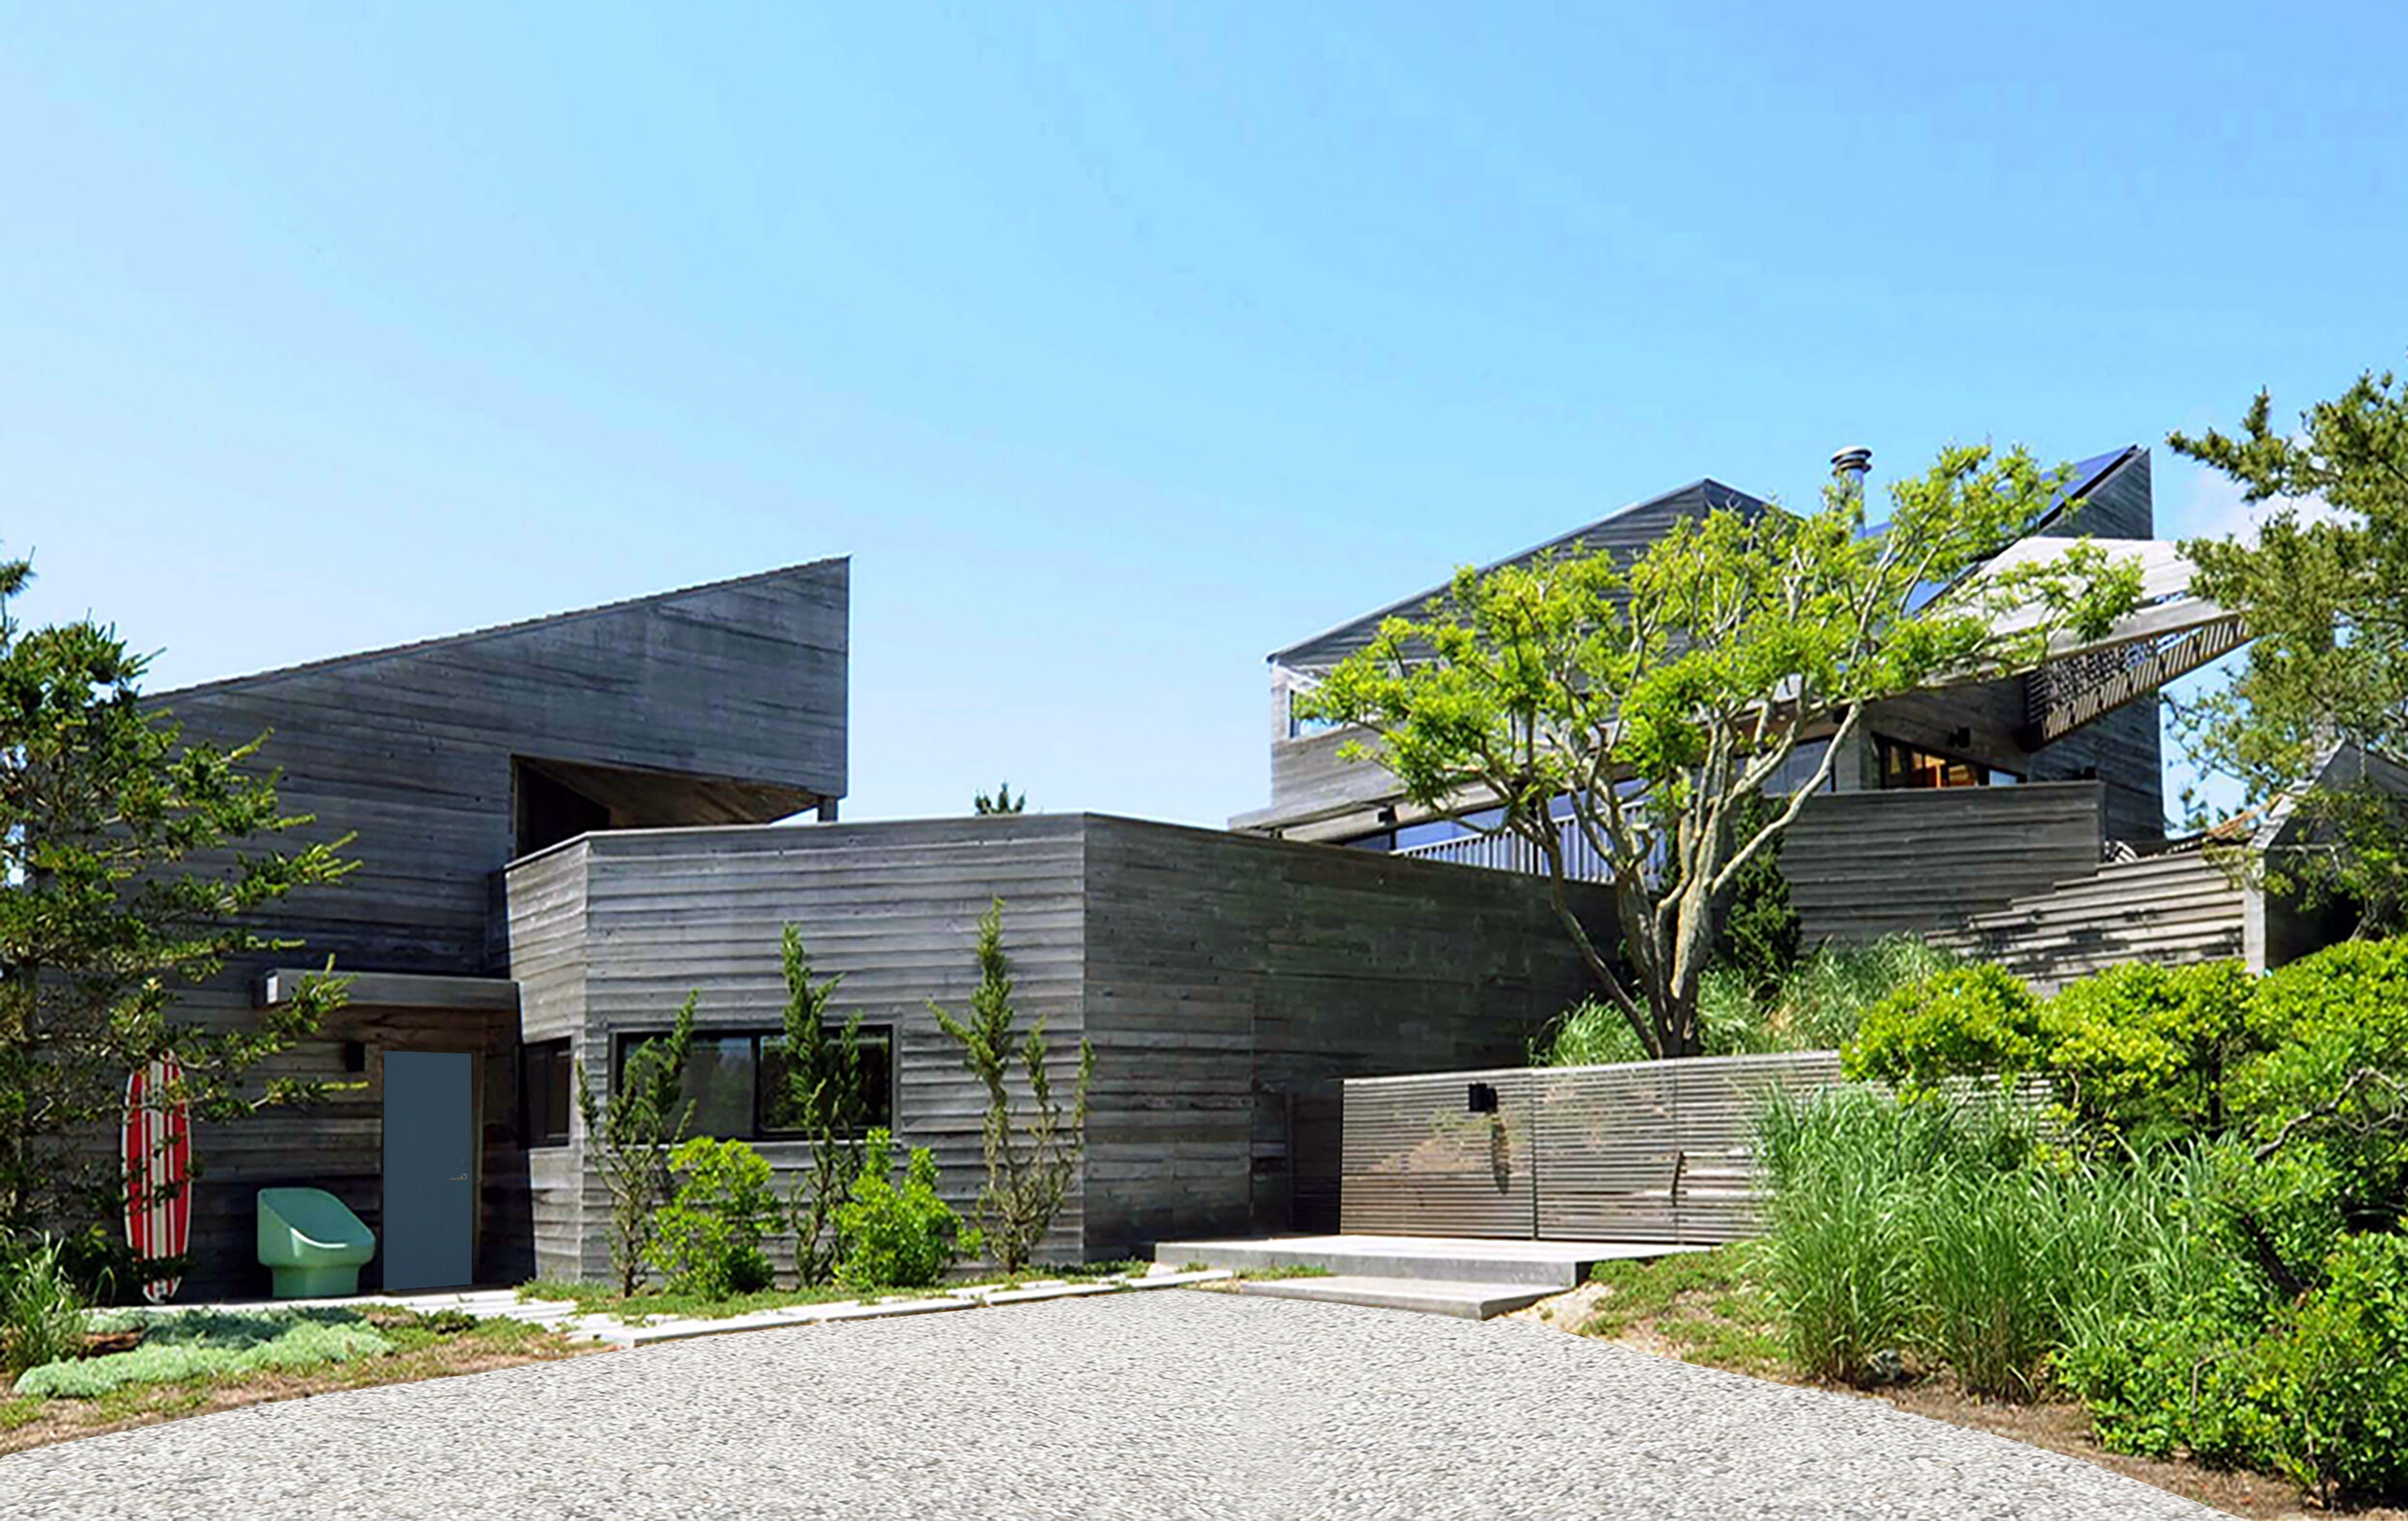 Dune house from driveway.jpg